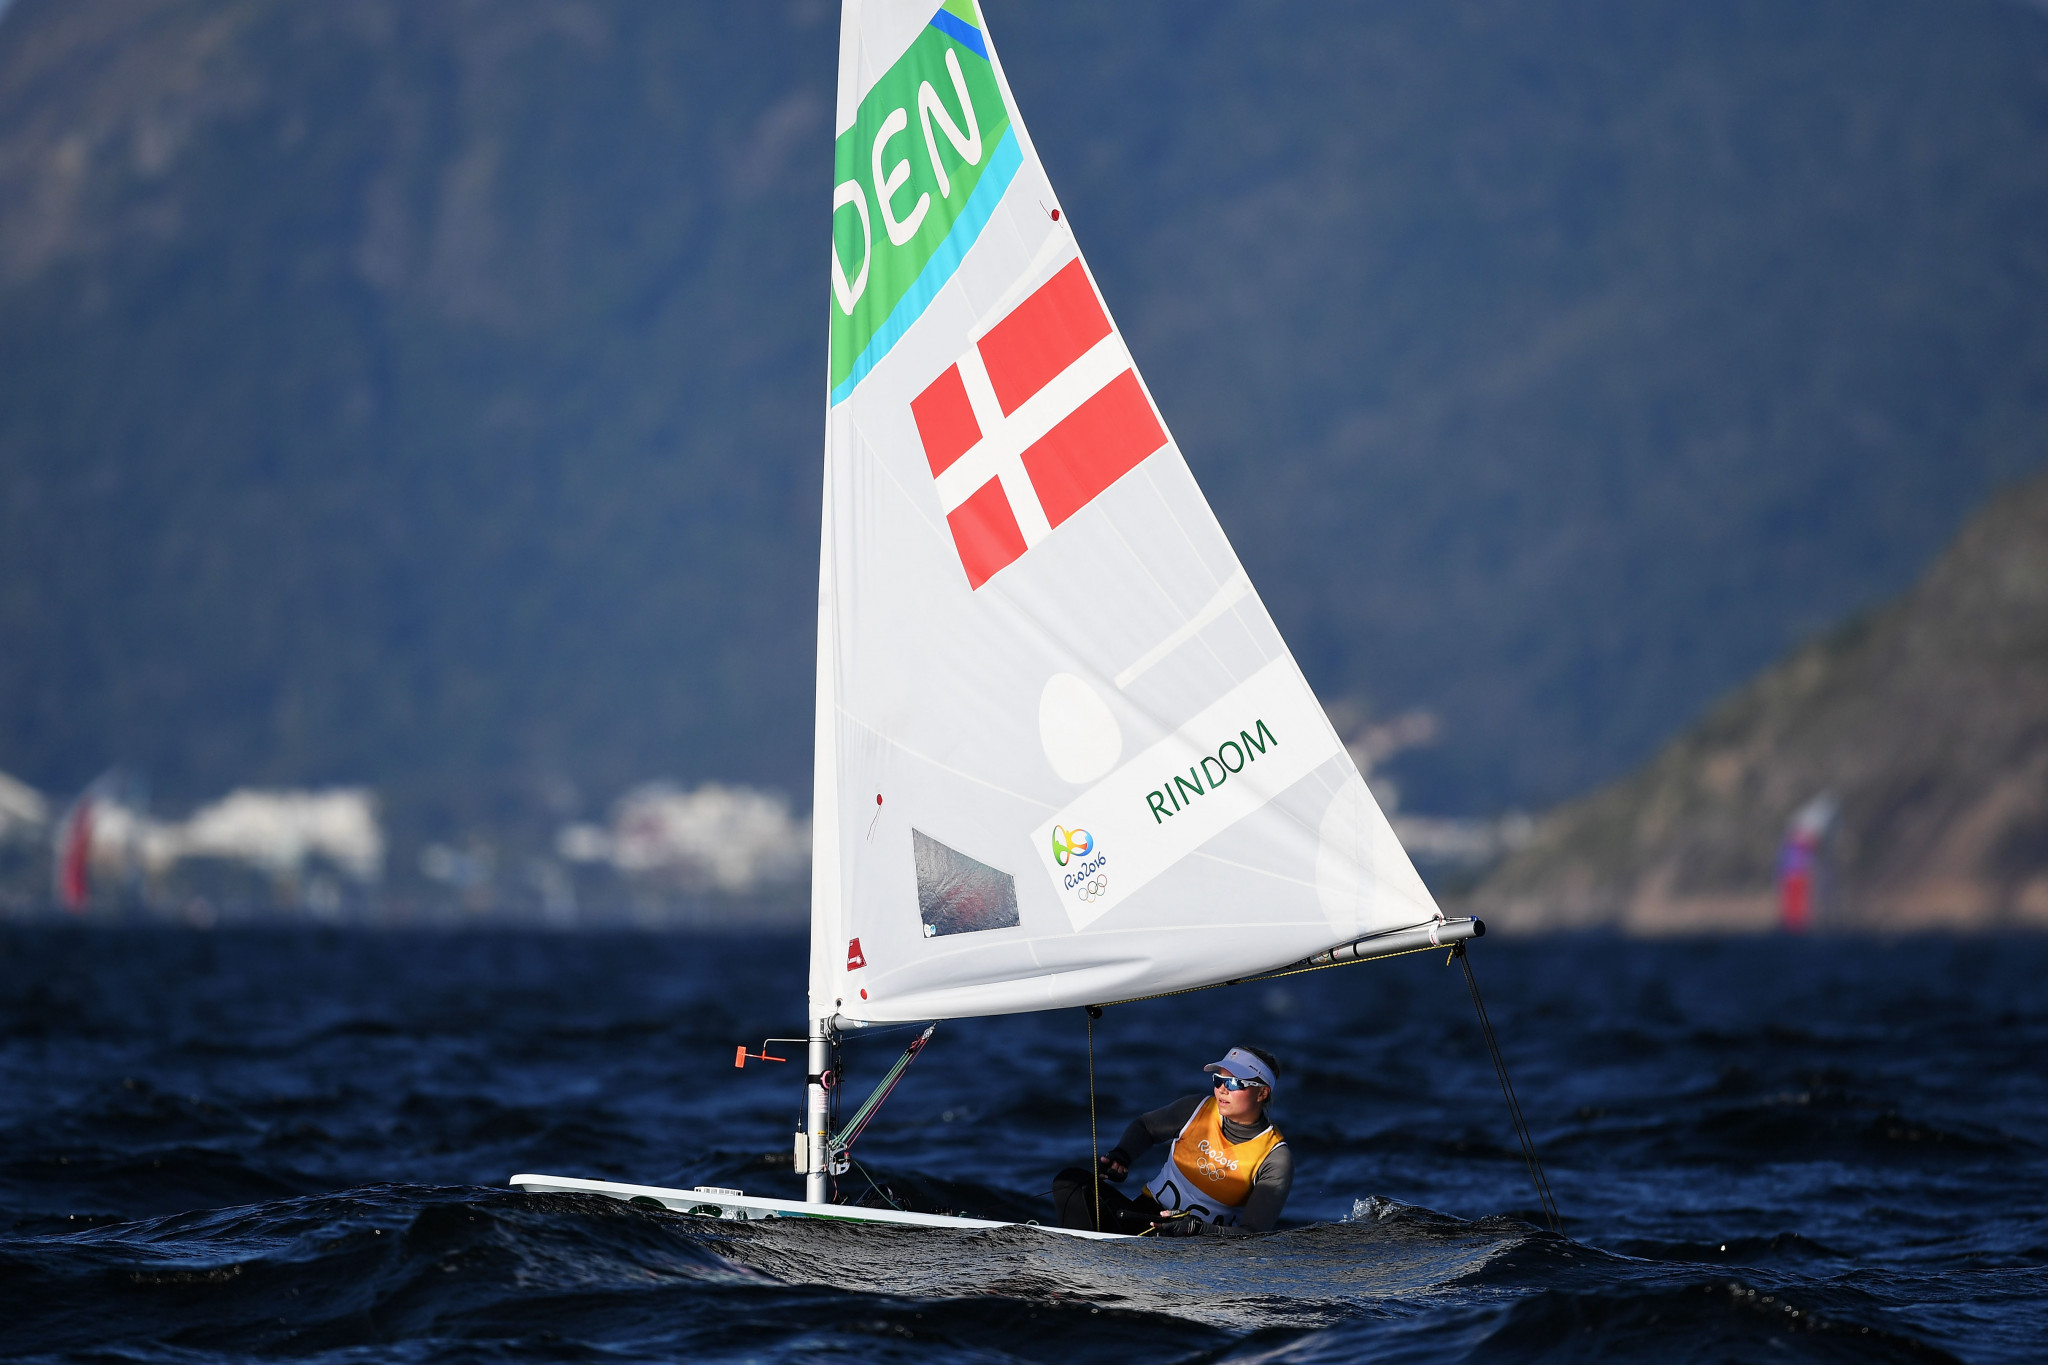 Anne-Marie Rindom has a clear lead at the European Laser Championships ©Getty Images